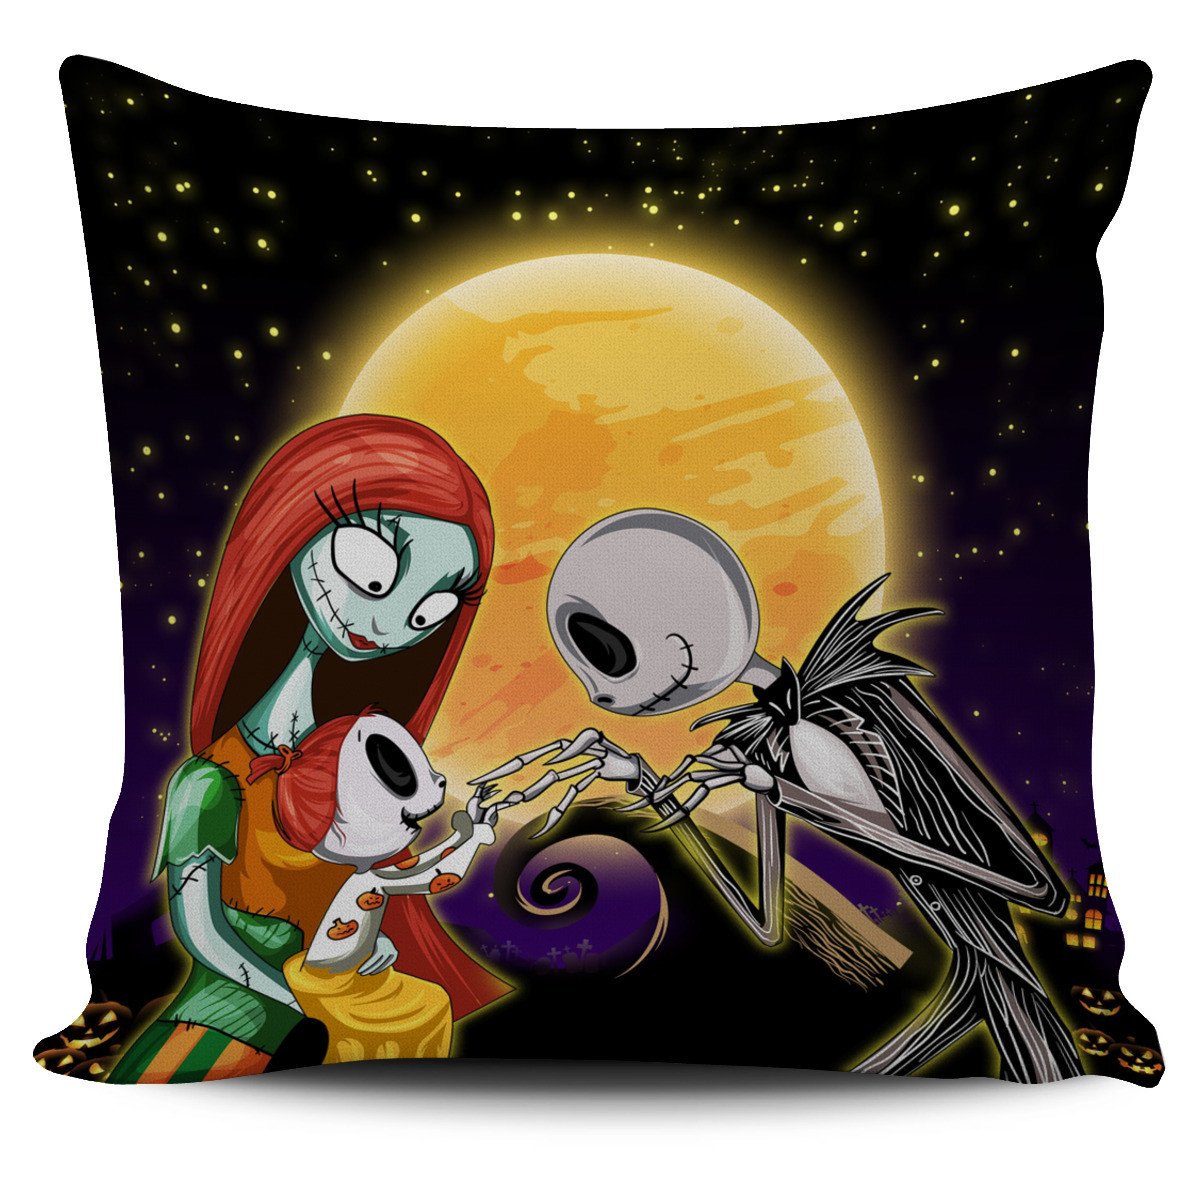 Jack Skellington Nightmare Before Christmas Pillow Cover